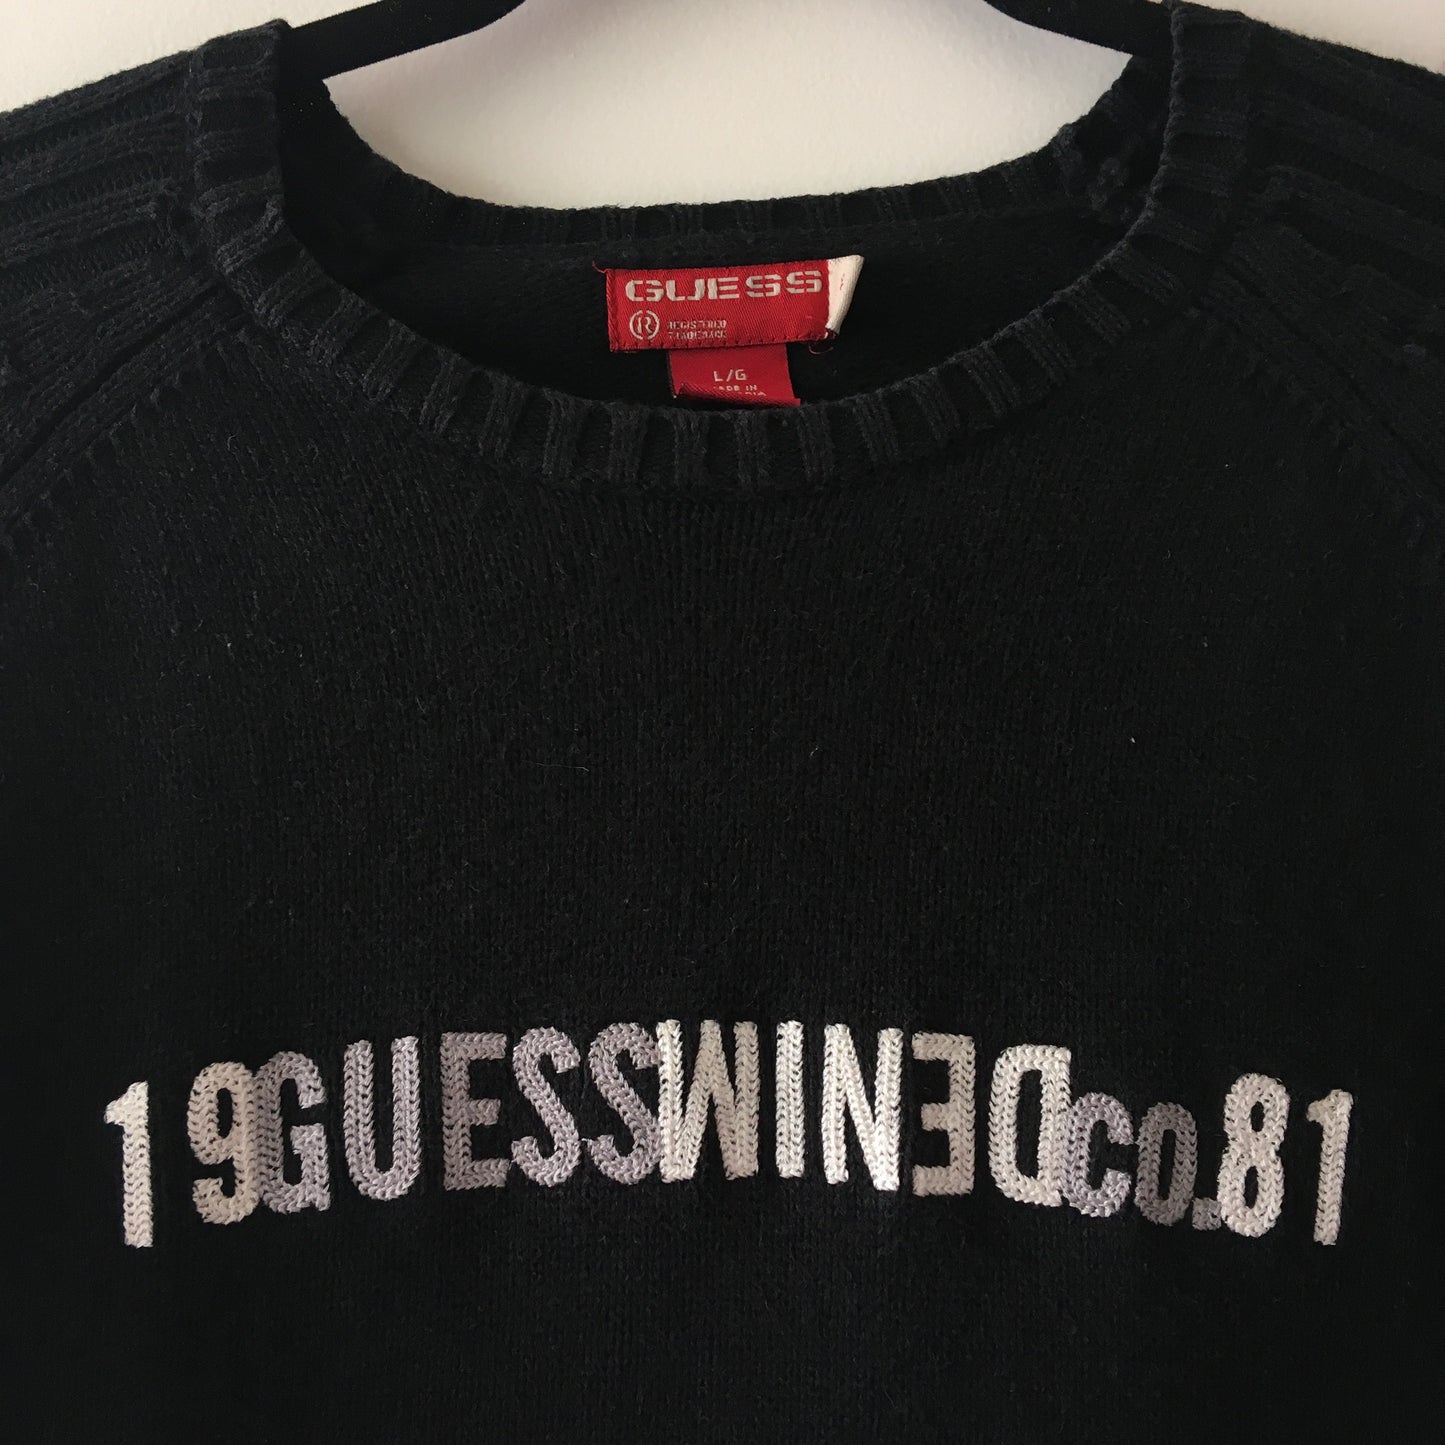 guess sweater